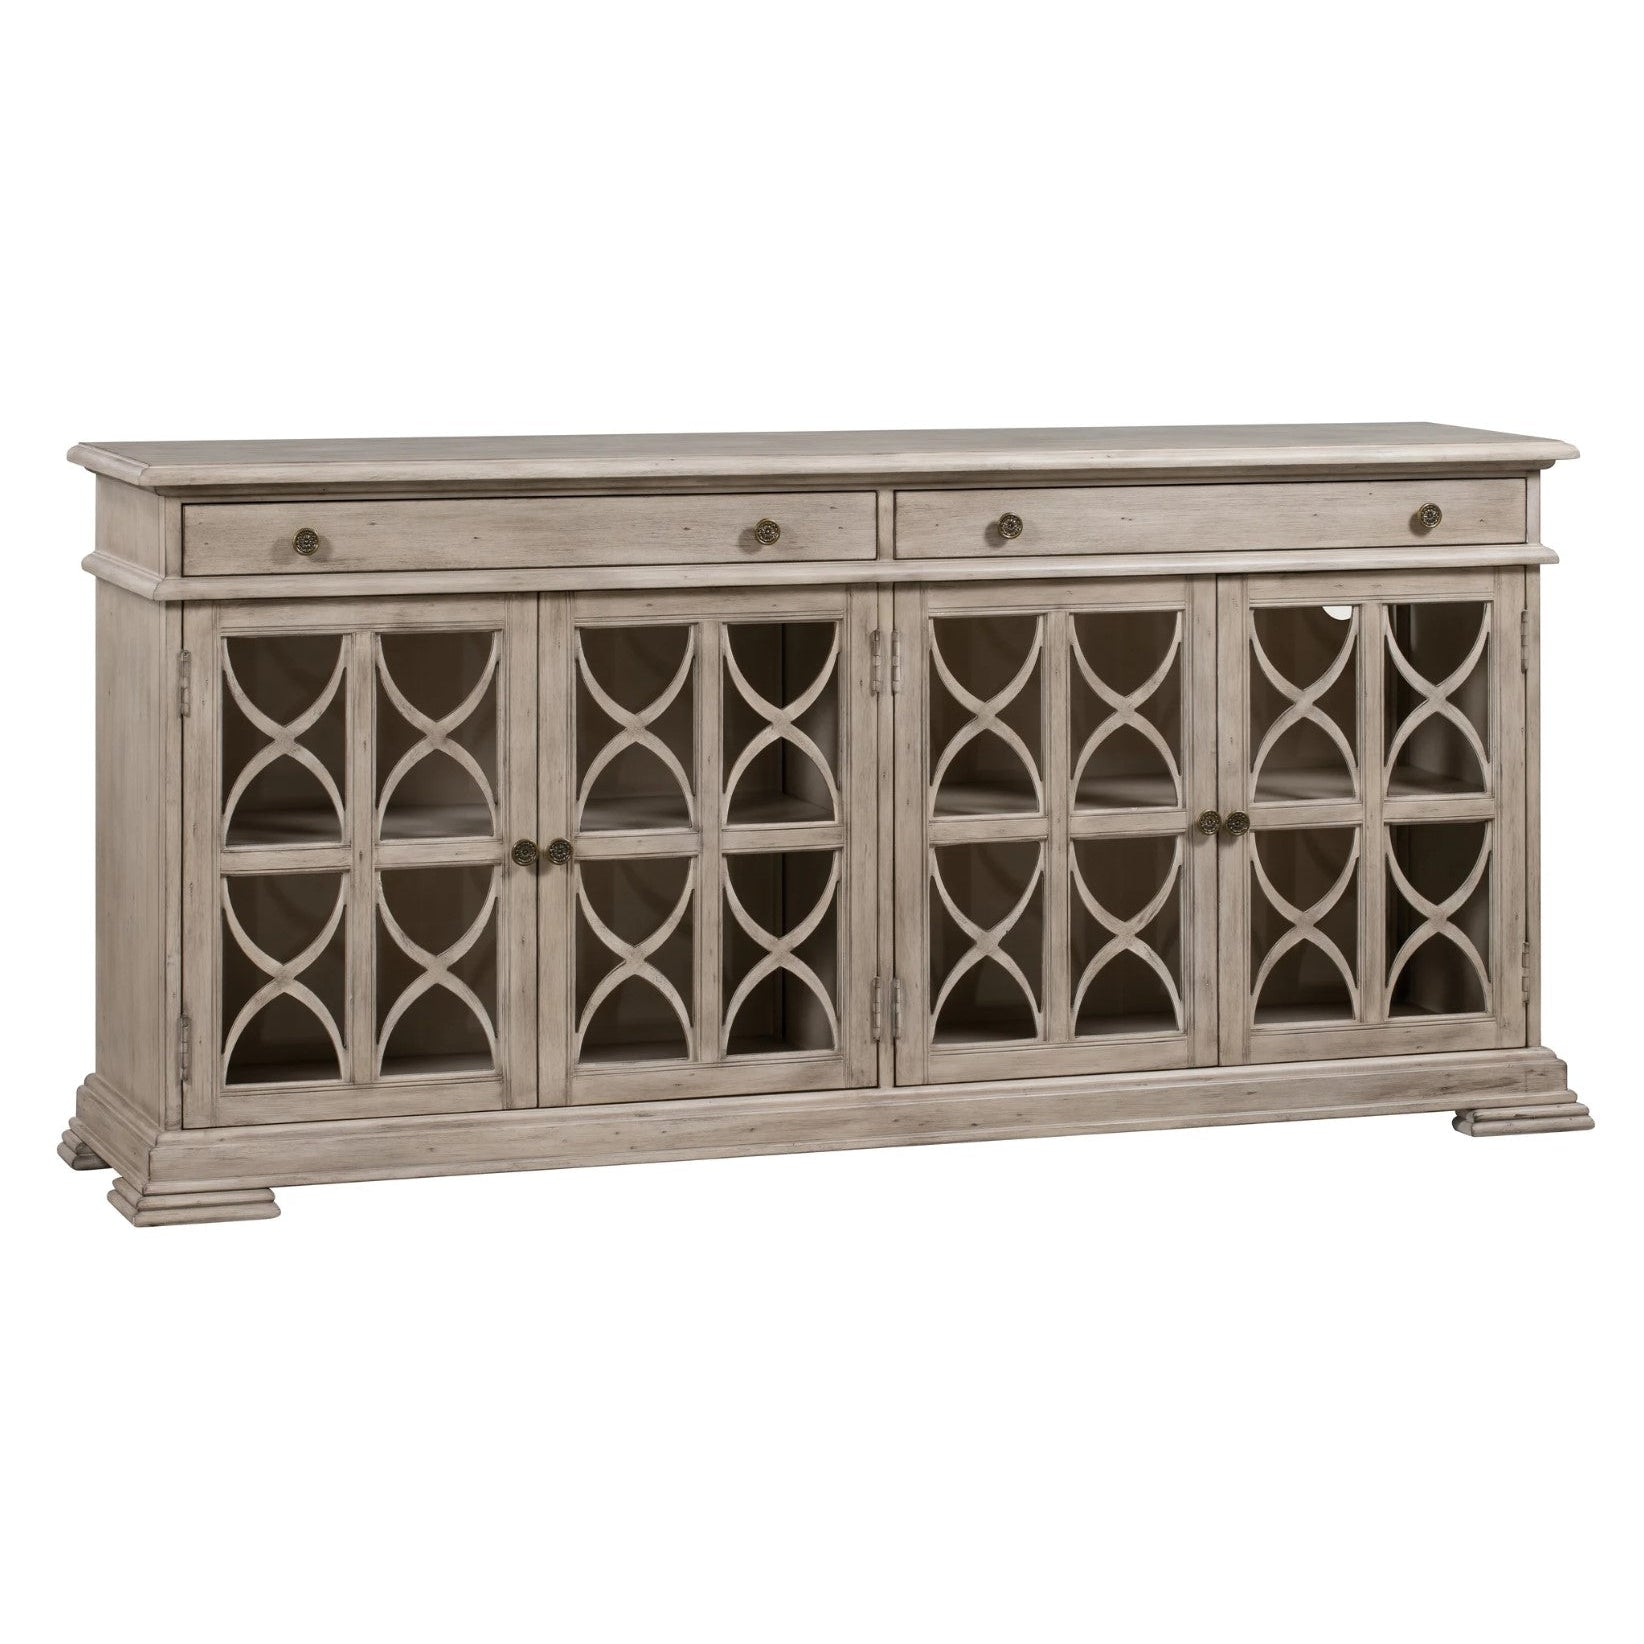 Crestview Collection Hawthorne Estate 76" x 17" x 37" 2-Drawer 4-Door Traditional Wood Fretwork Sideboard In Brushed Wheat Finish